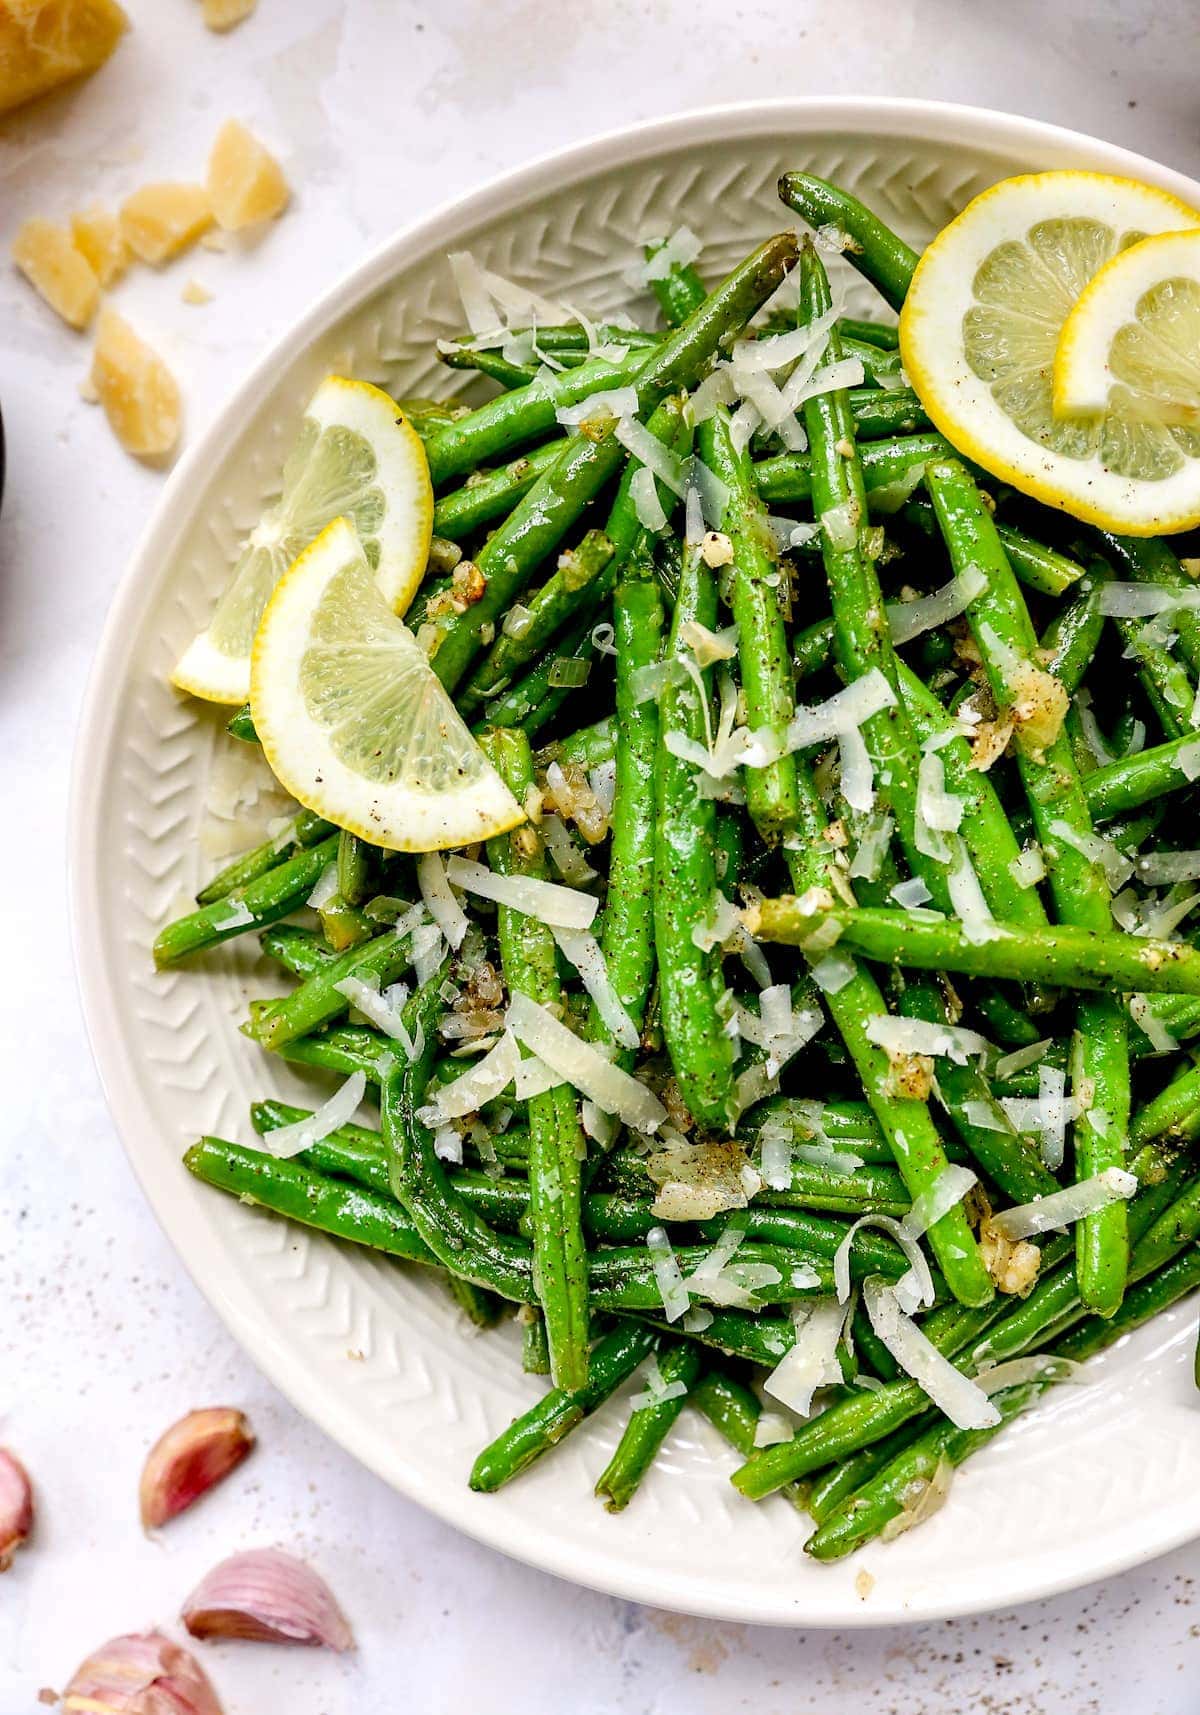 Oven Roasted Green Beans with Parmesan - Healthier Dishes